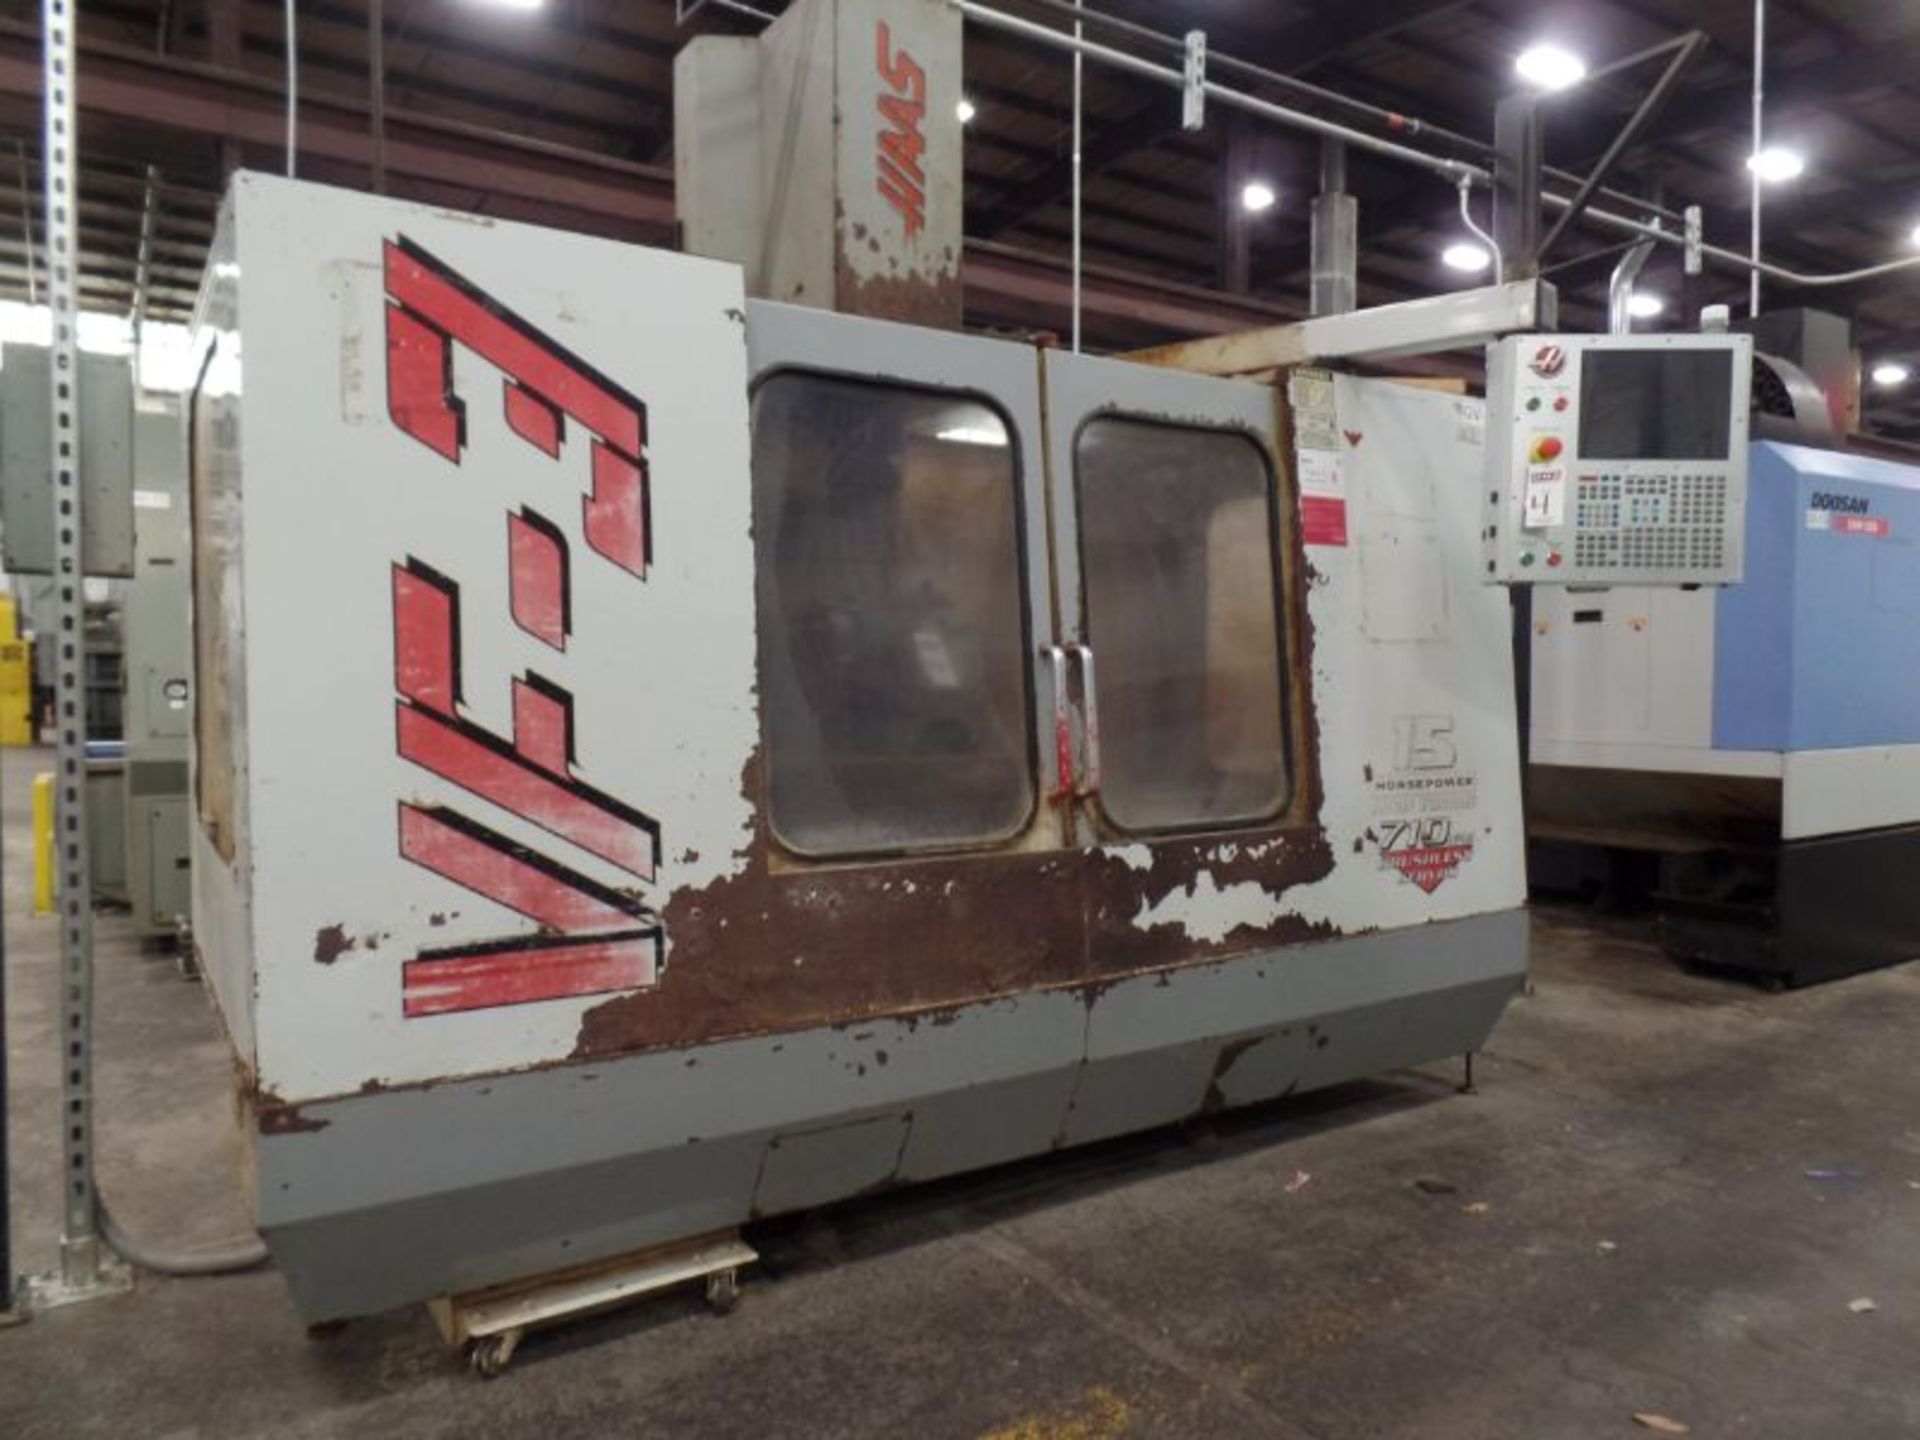 Haas VF-3, Retro’d control, 40”x 20”x 20” Travels, CT40, New 1997 *Indexer Sold Separate*